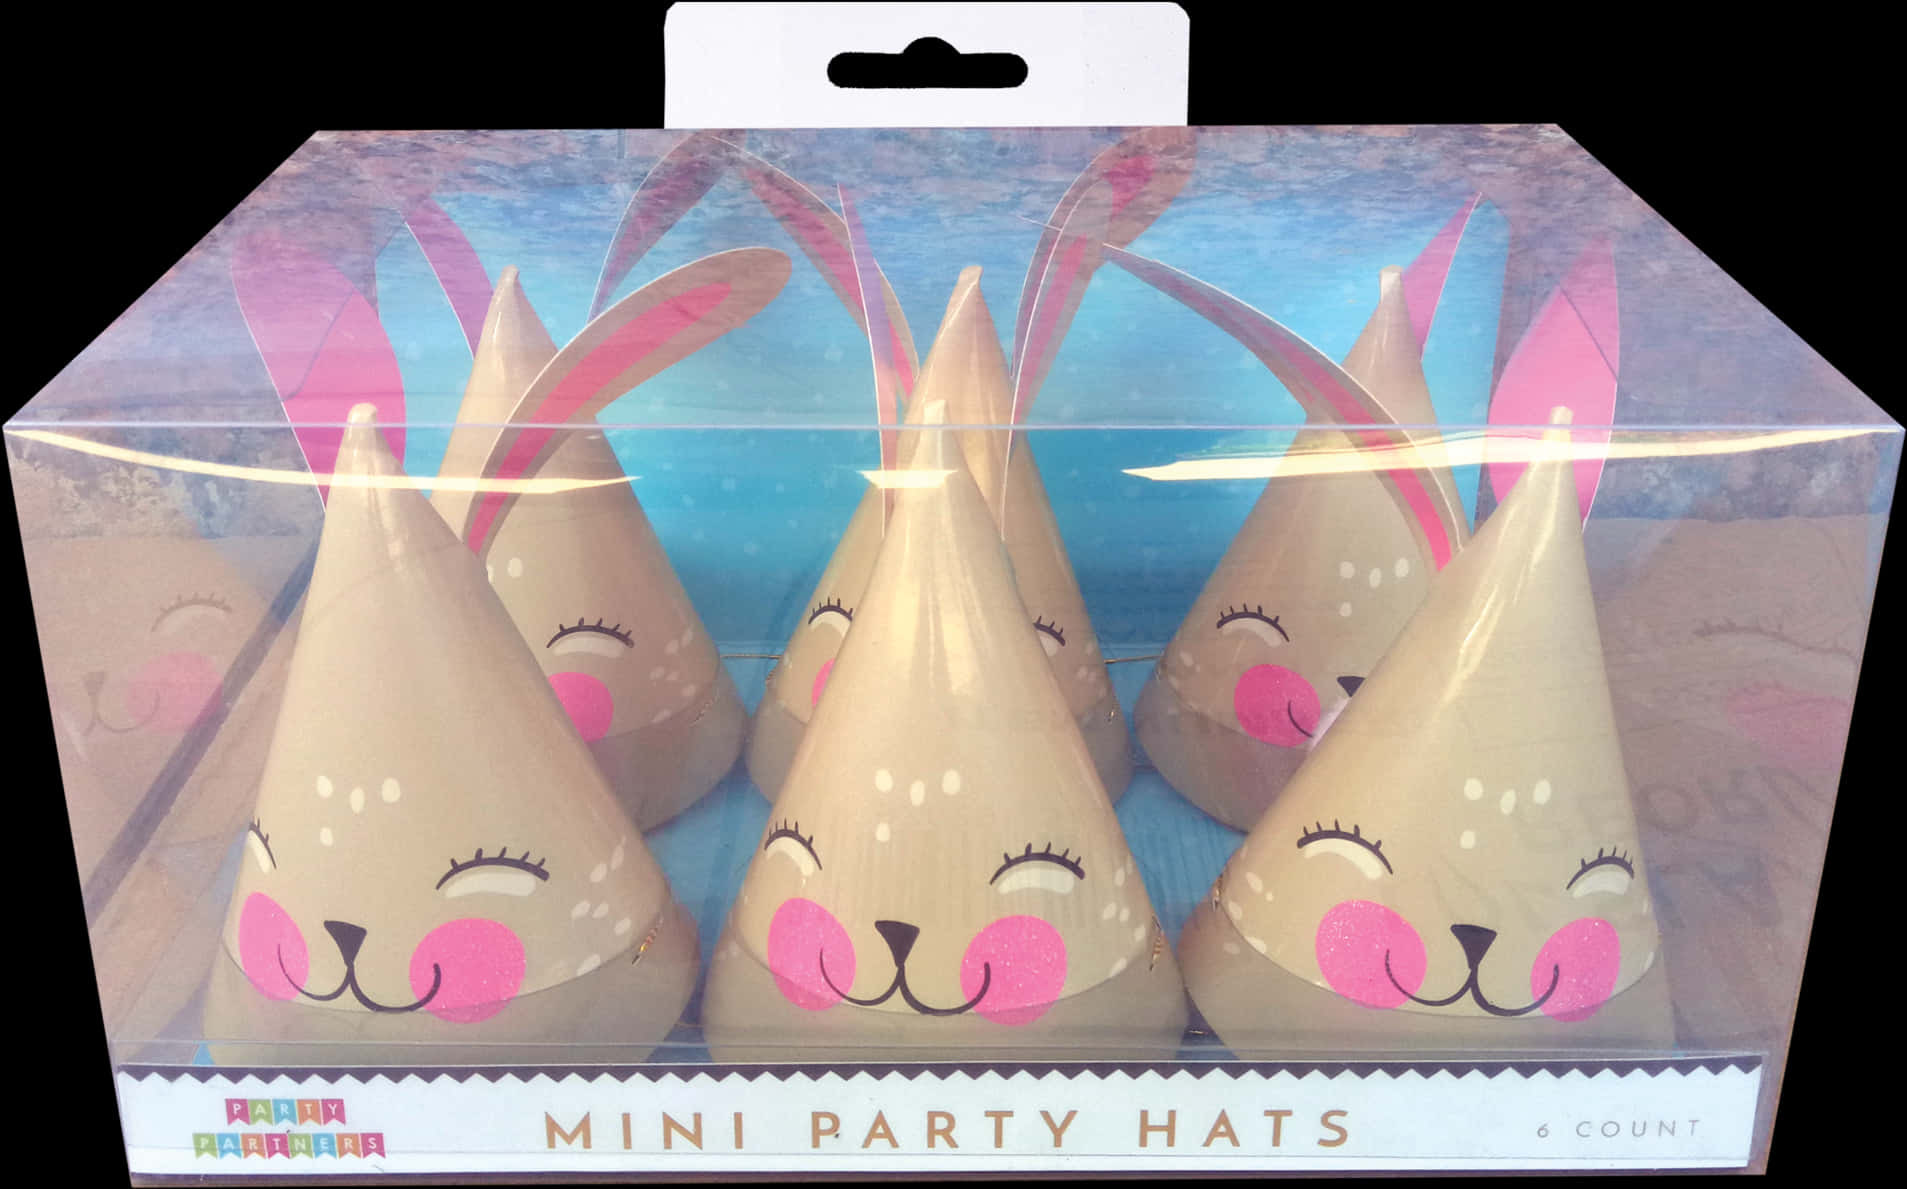 A Group Of Hats In A Plastic Package